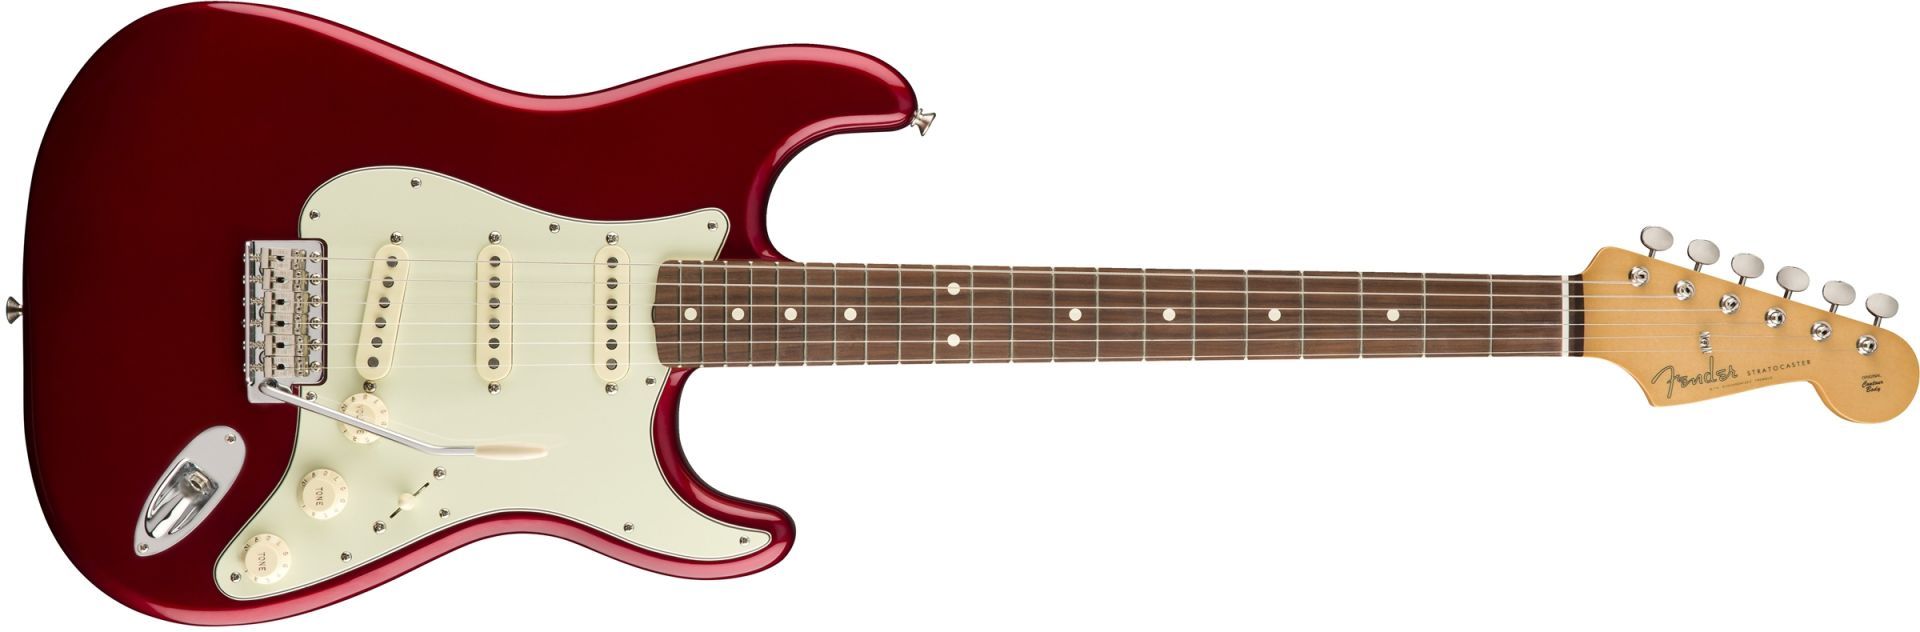 Chitara Electrica Fender Classic 60s Stratocaster Candy Apple Red